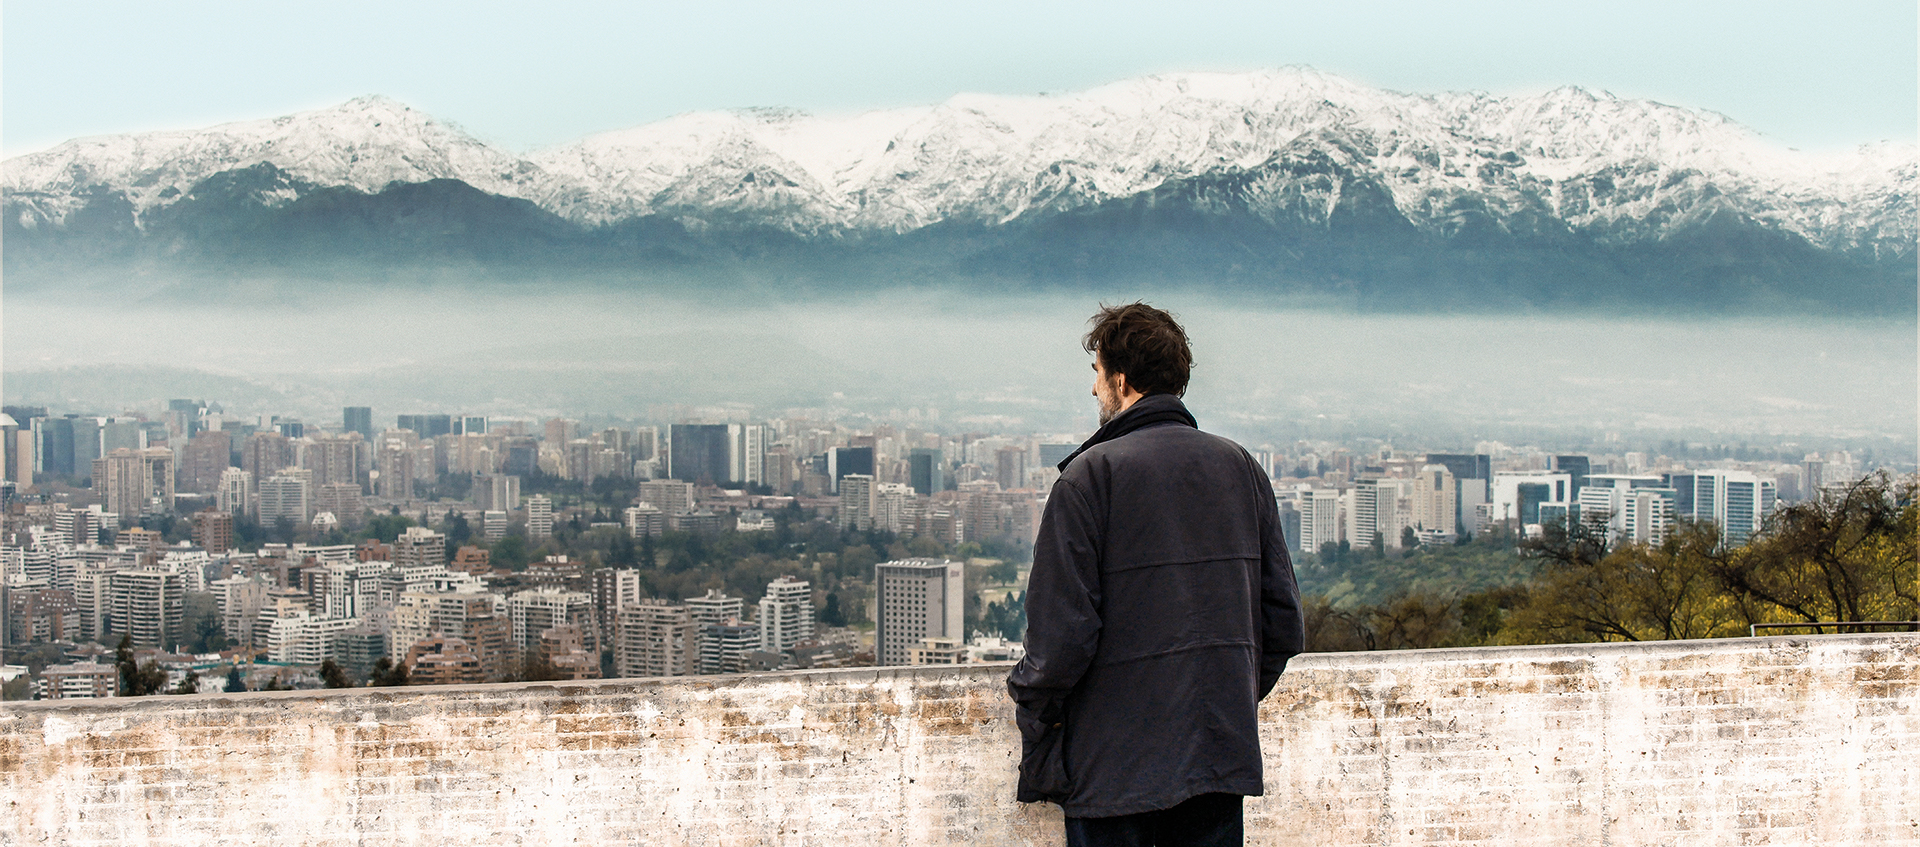 a man in a black coat overlooking a city with mountain in the background